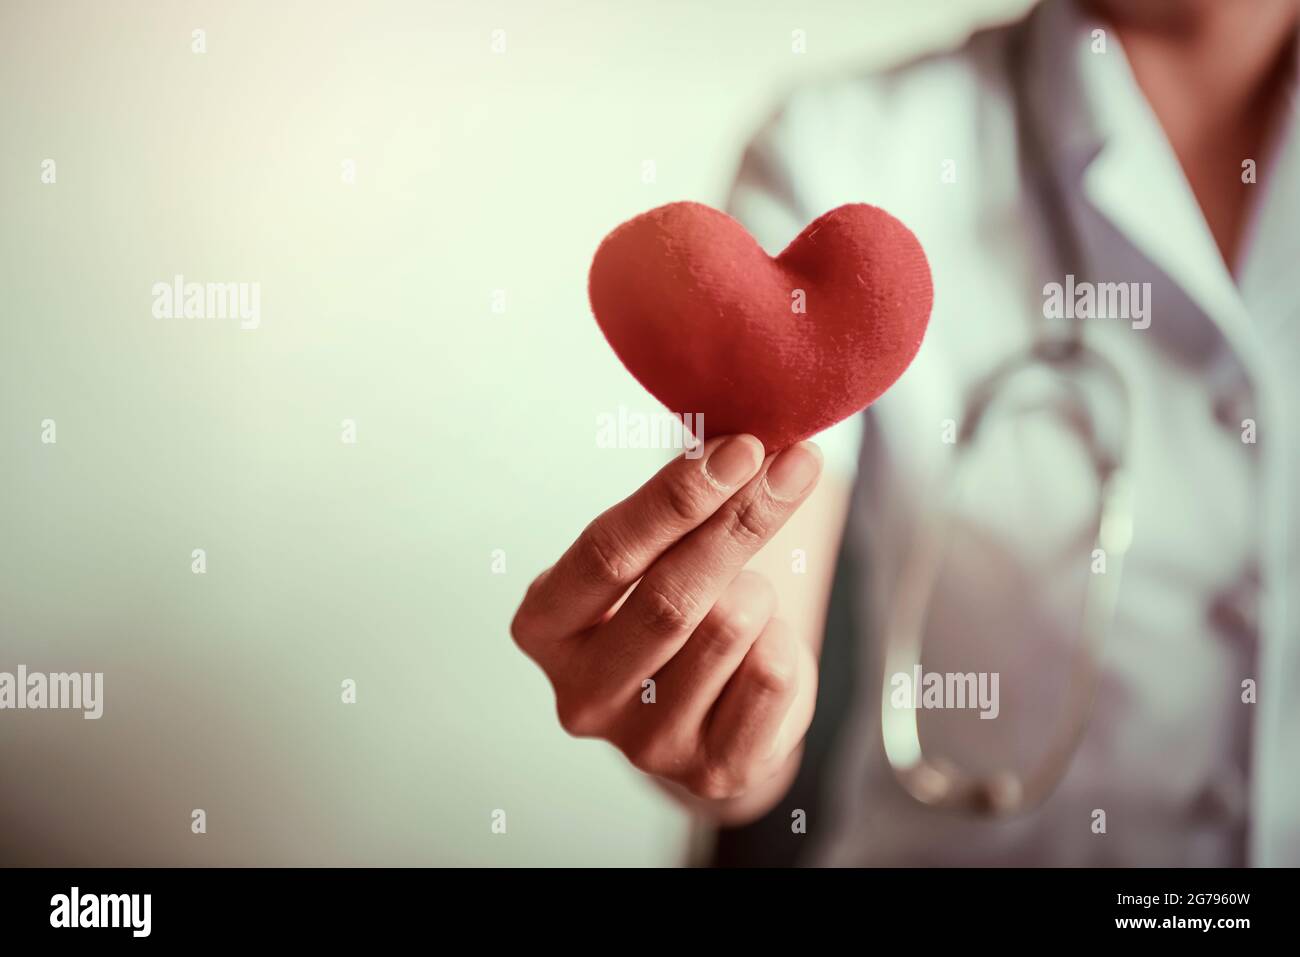 Red heart in nurse's hands.Cross processing and Split tone instragram like process. Stock Photo